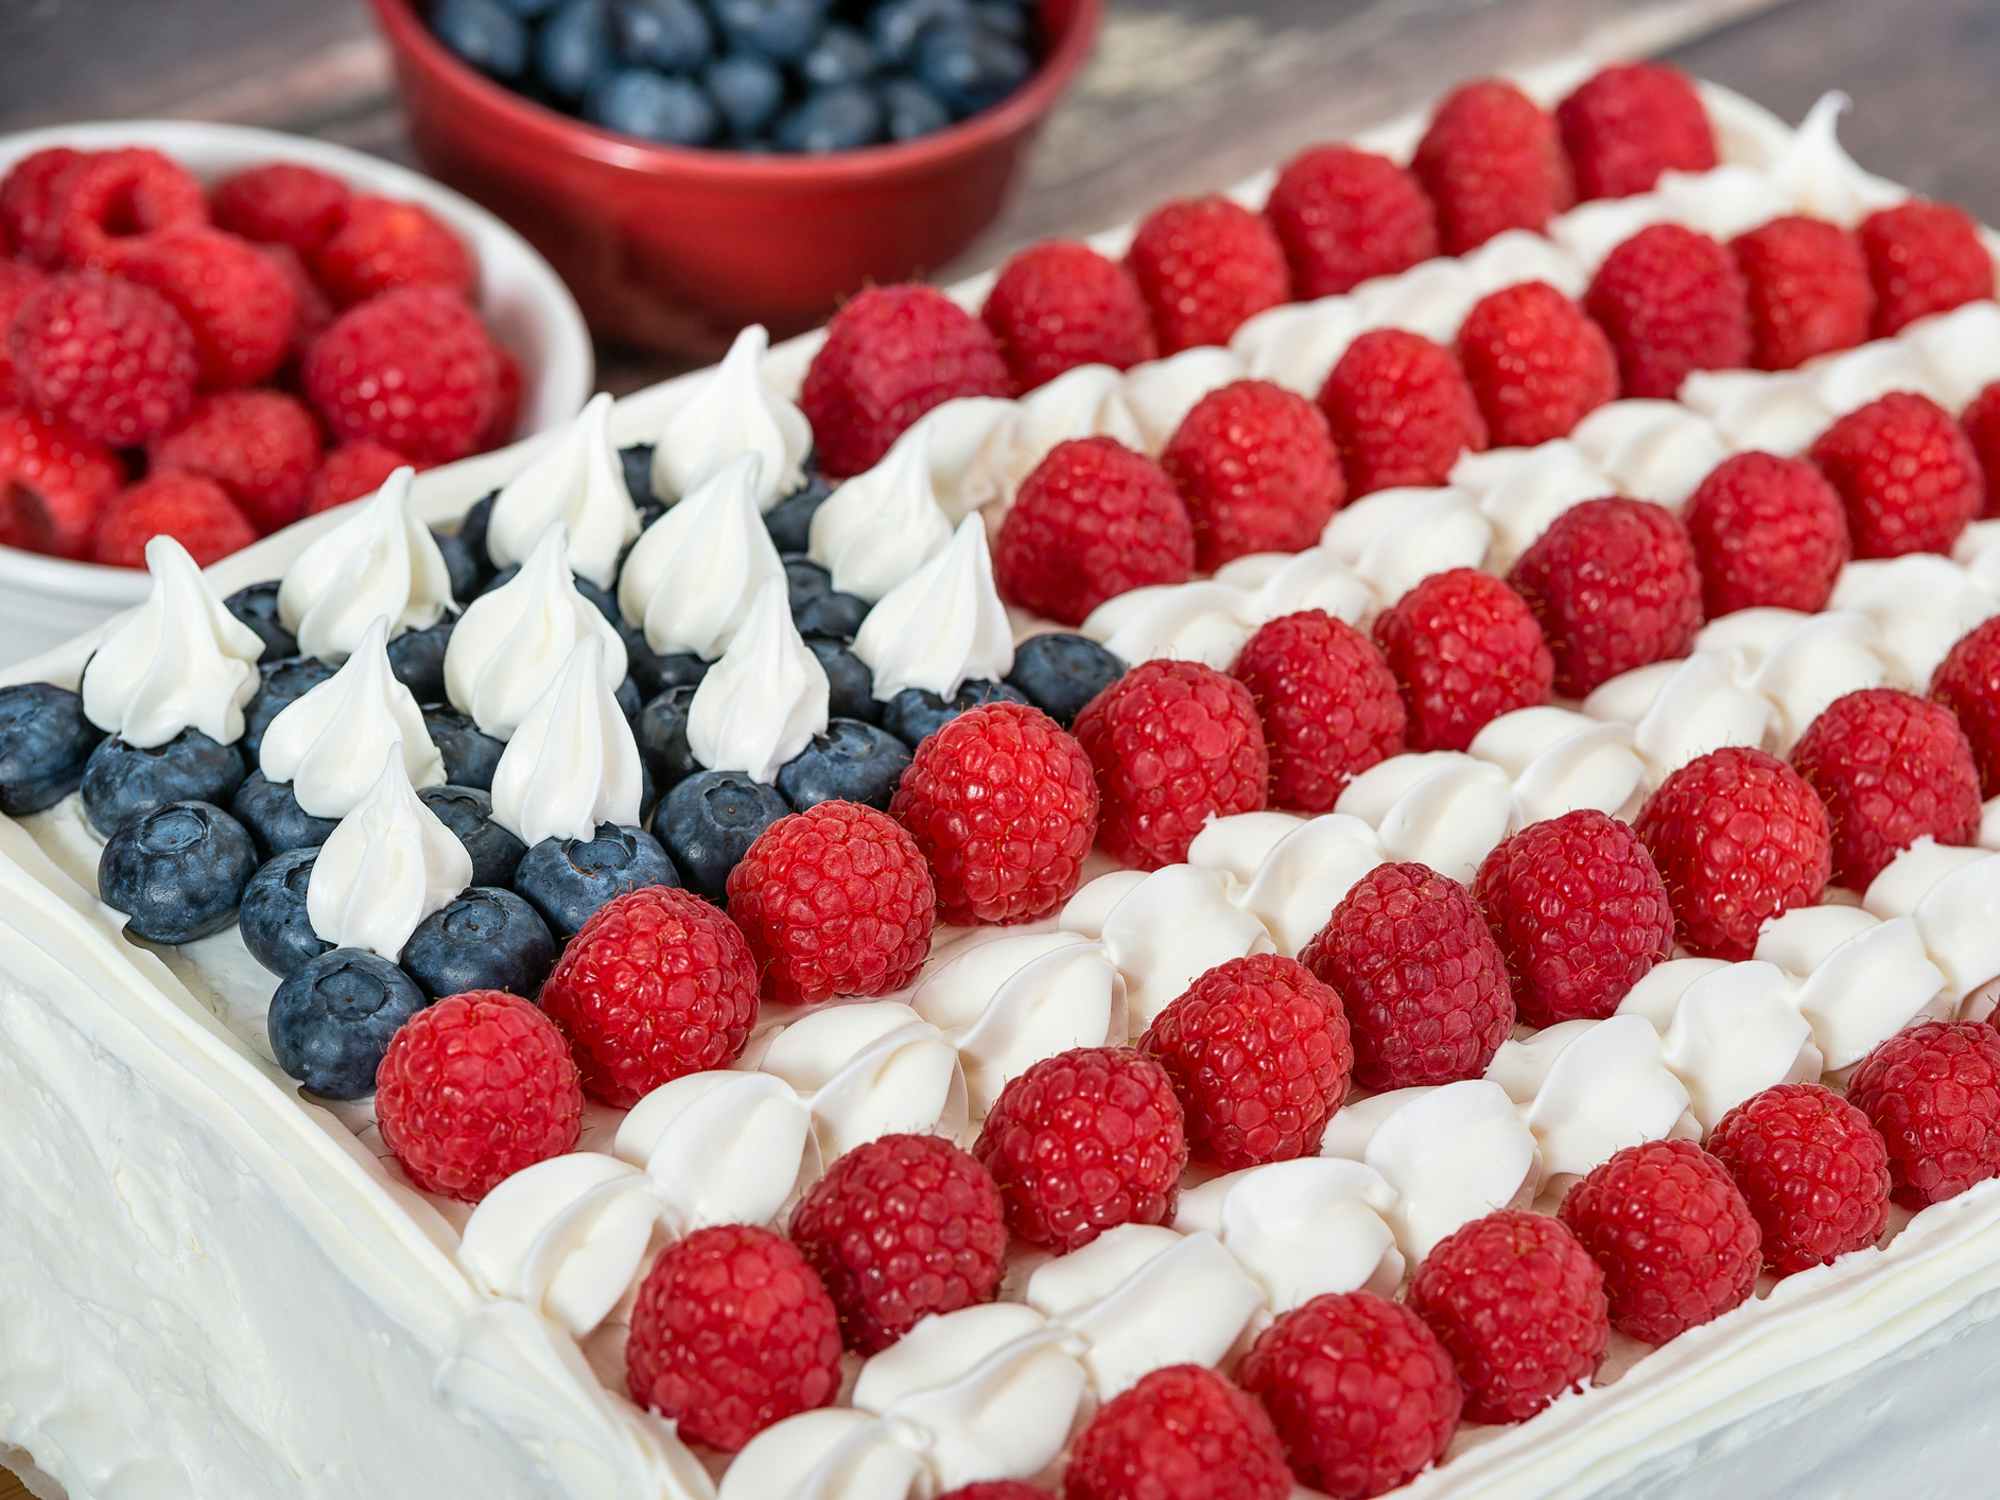 Patriotic, red white and blue, American flag cake. Fresh blueberries and raspberries in the background